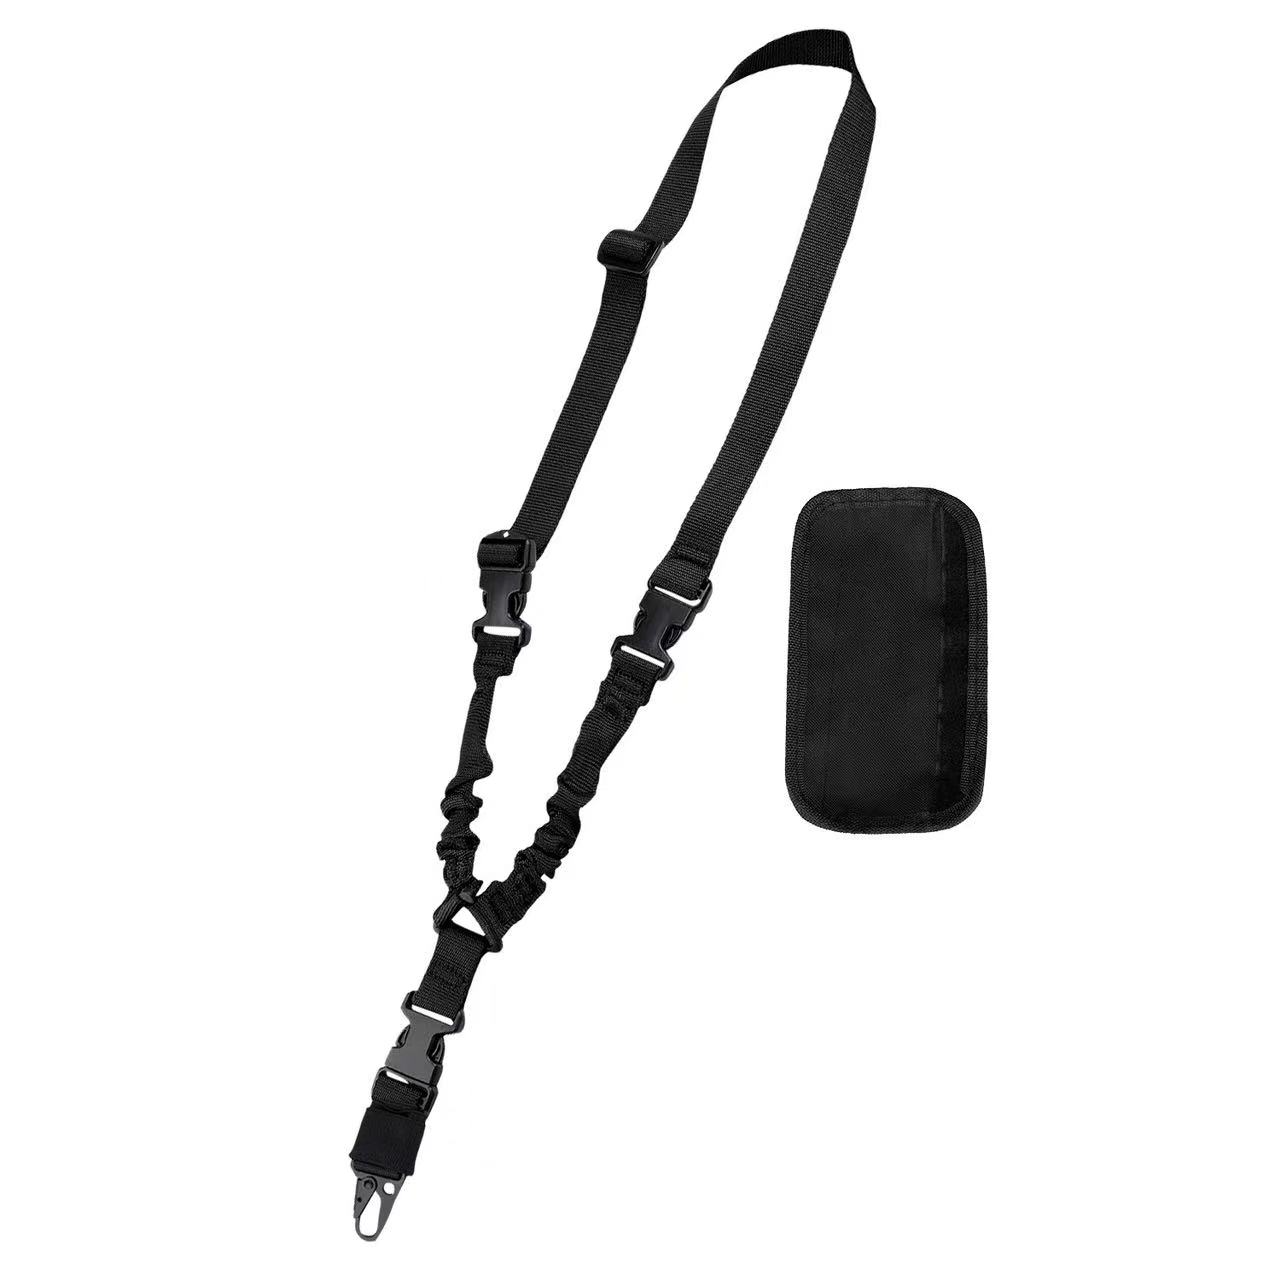 Sandstorm Single Point Quick Release Bungee Sling